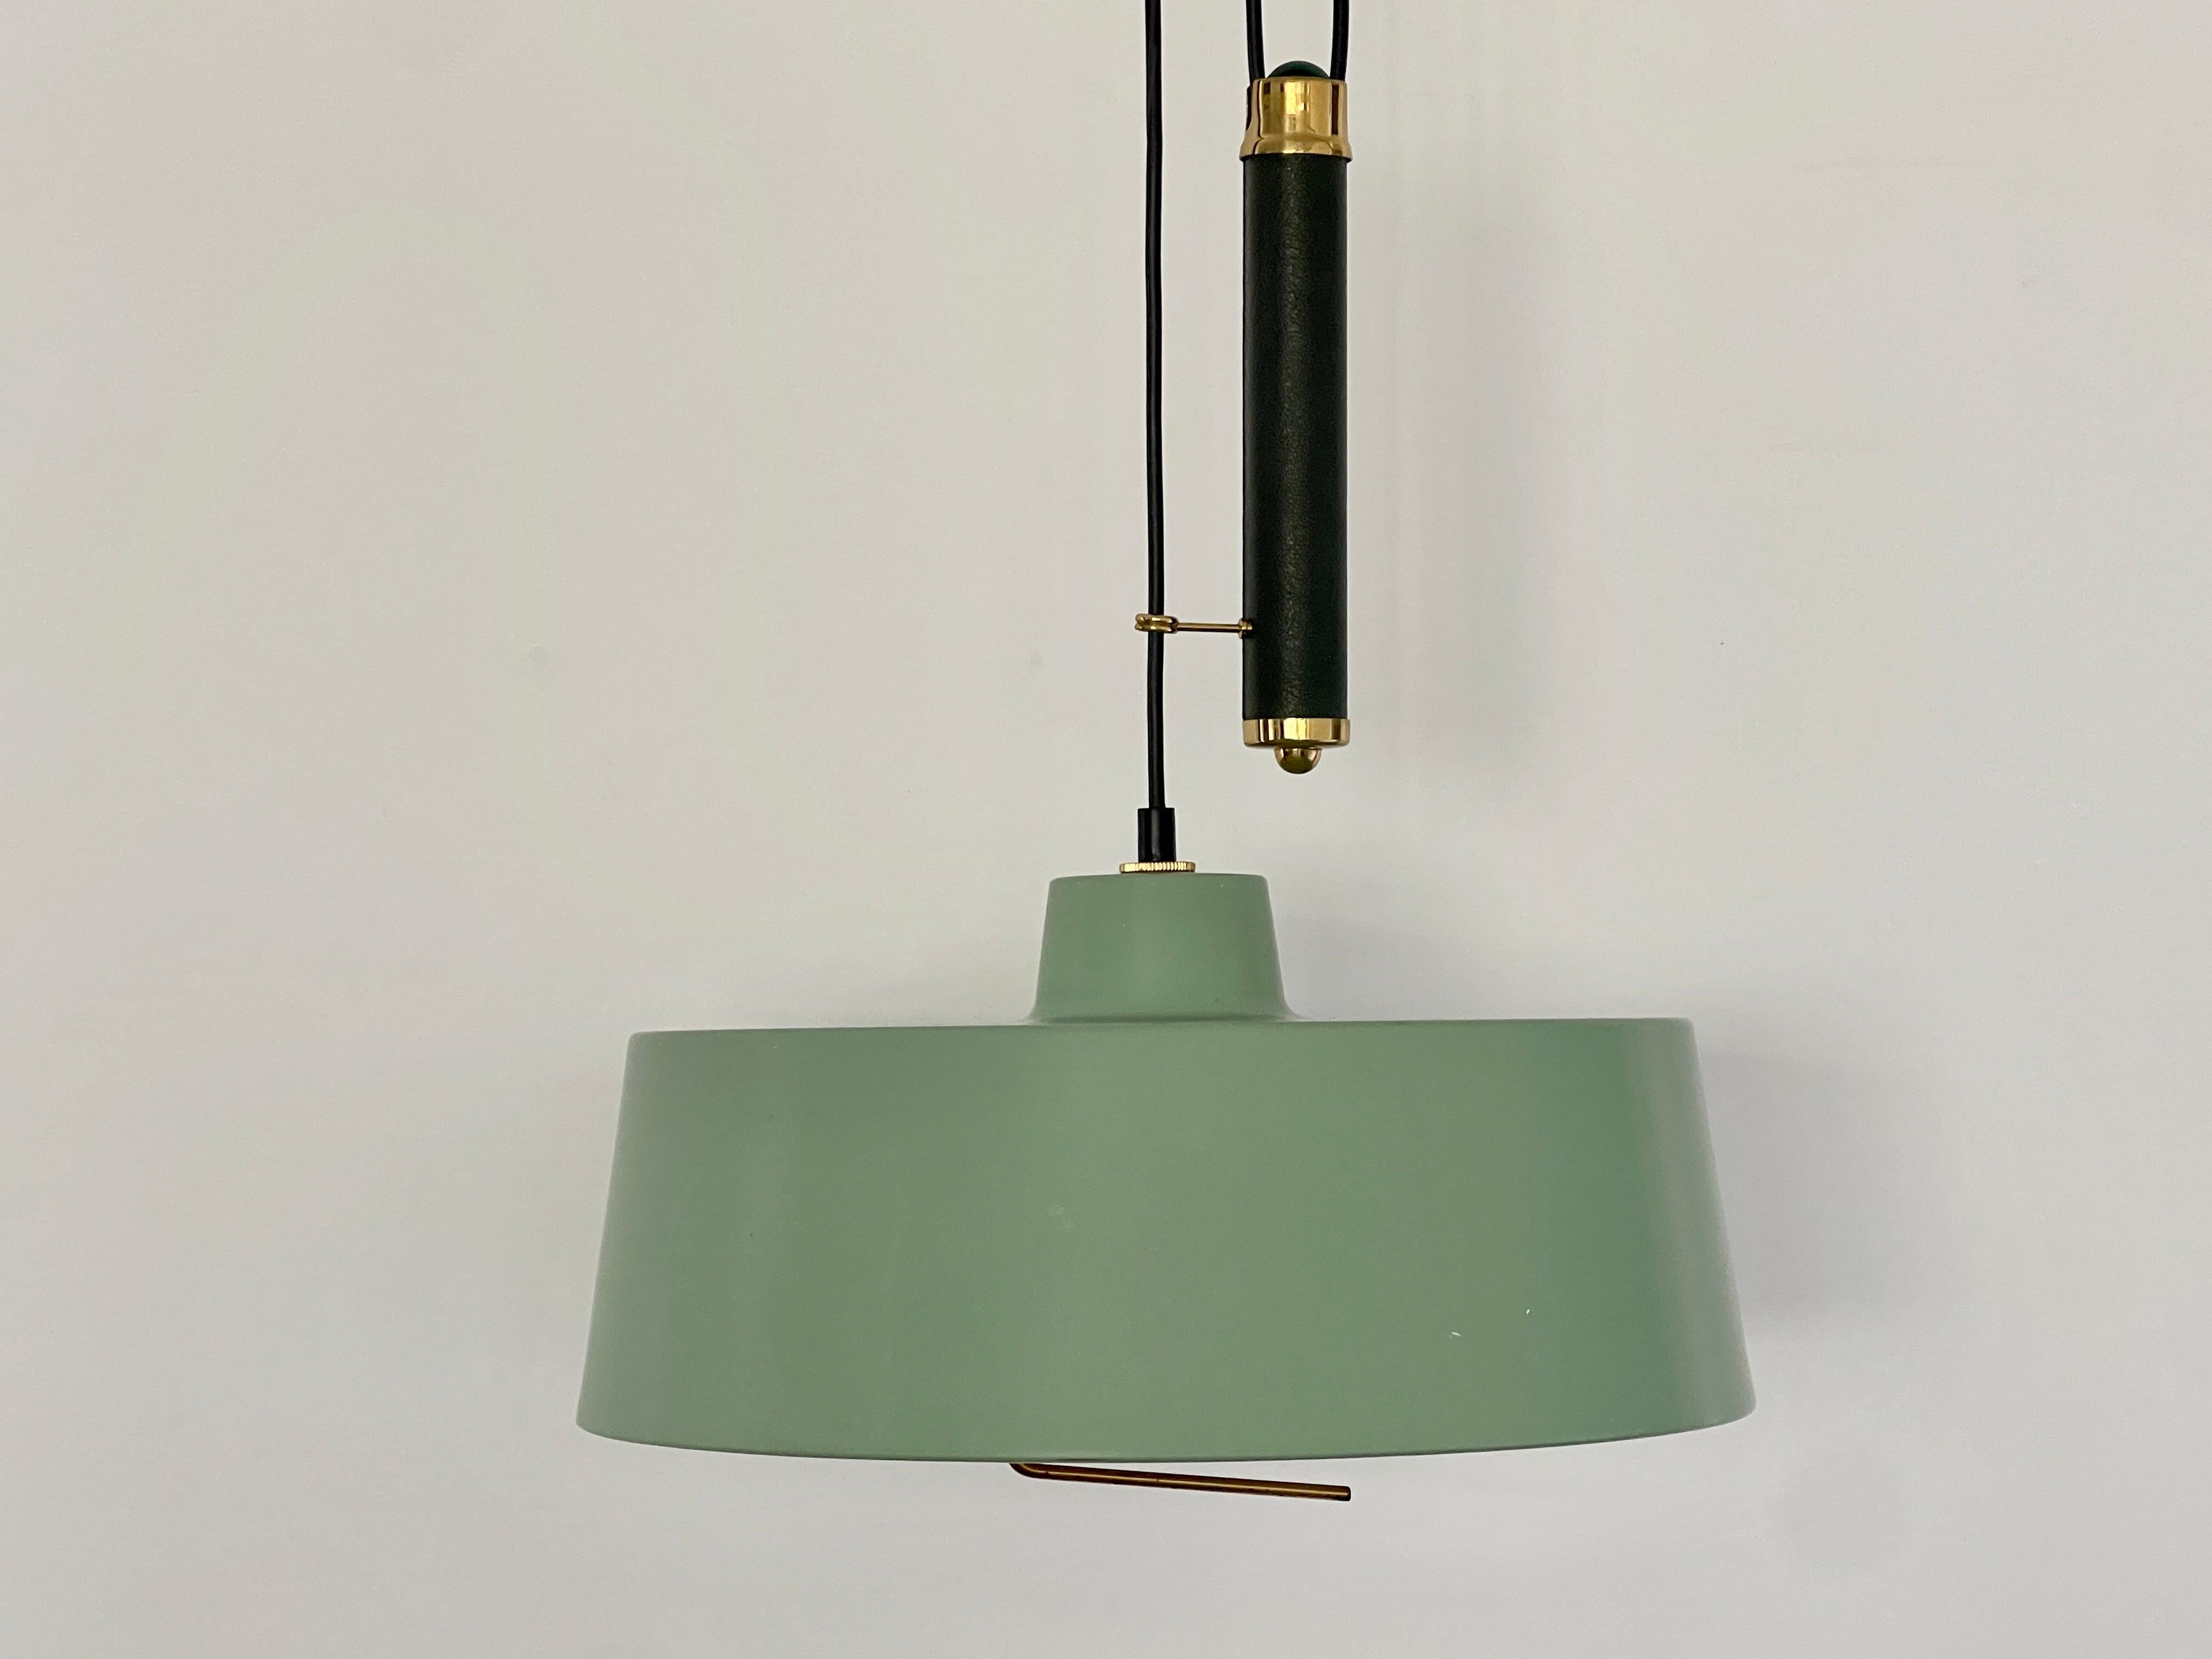 Stilnovo counterbalance pendant with original enameled green shade and canopy.
Skas leather handle with thick brass pulley hardware. 
Measures: Maximum height 86.61 x 14.96 x 14.96 in.